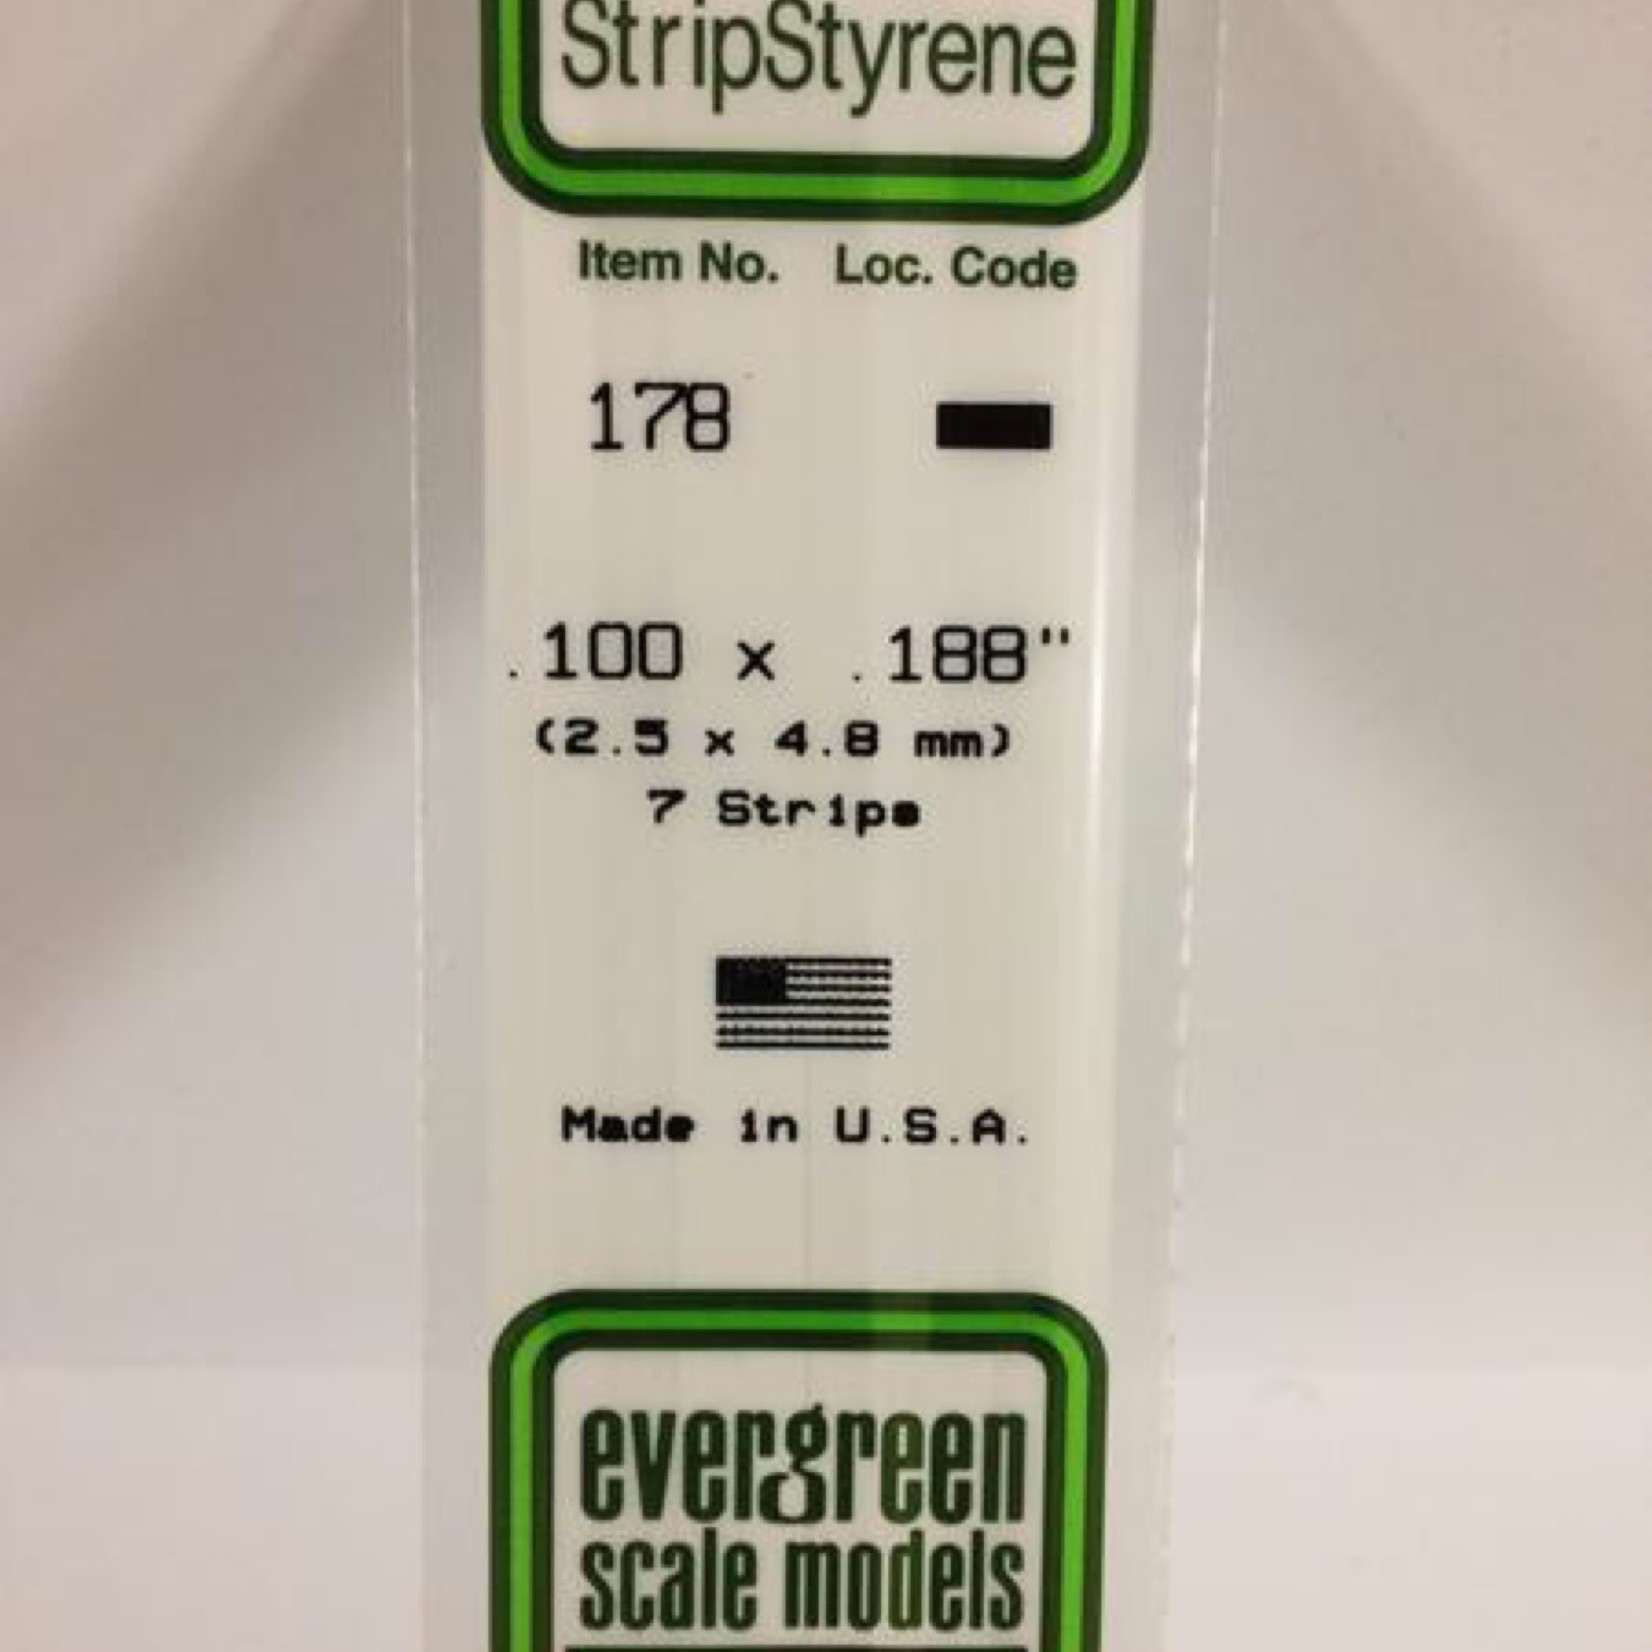 Evergreen Scale Models Evergreen 178 - .100" X .188" OPAQUE WHITE POLYSTYRENE STRIP #178